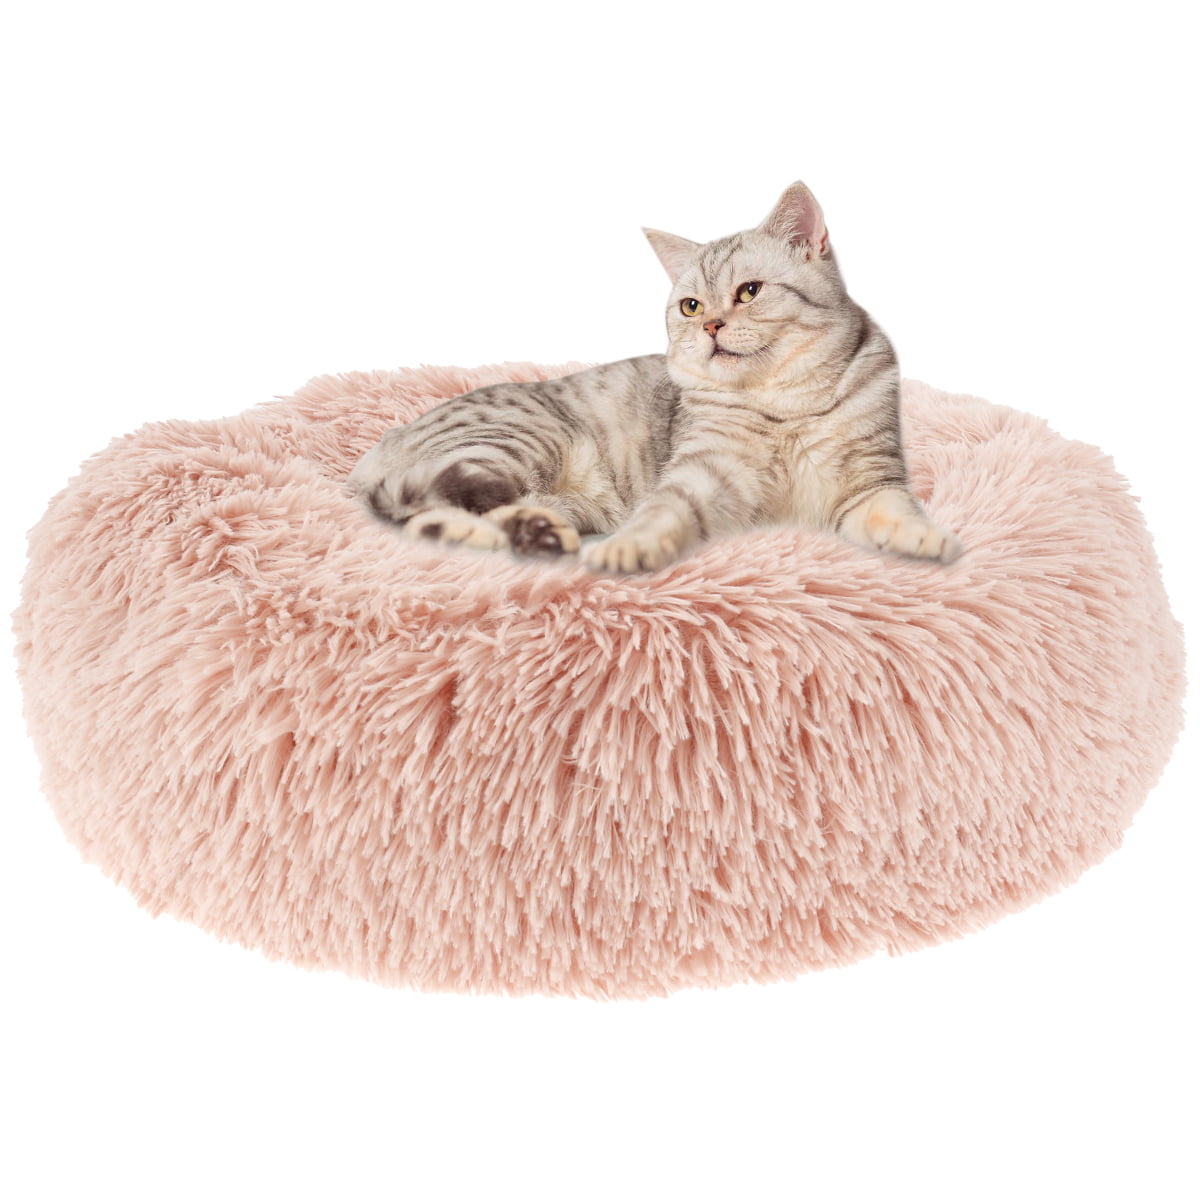 Fit Design Pet Cat Bed for Cats Small Dogs,Function 2 in 1 Soft Plush Blanket for Indoor Cats Dogs,Self-Warming Fluffy Pet Bed for Kittens Puppy Dog,Machine Washable-White 